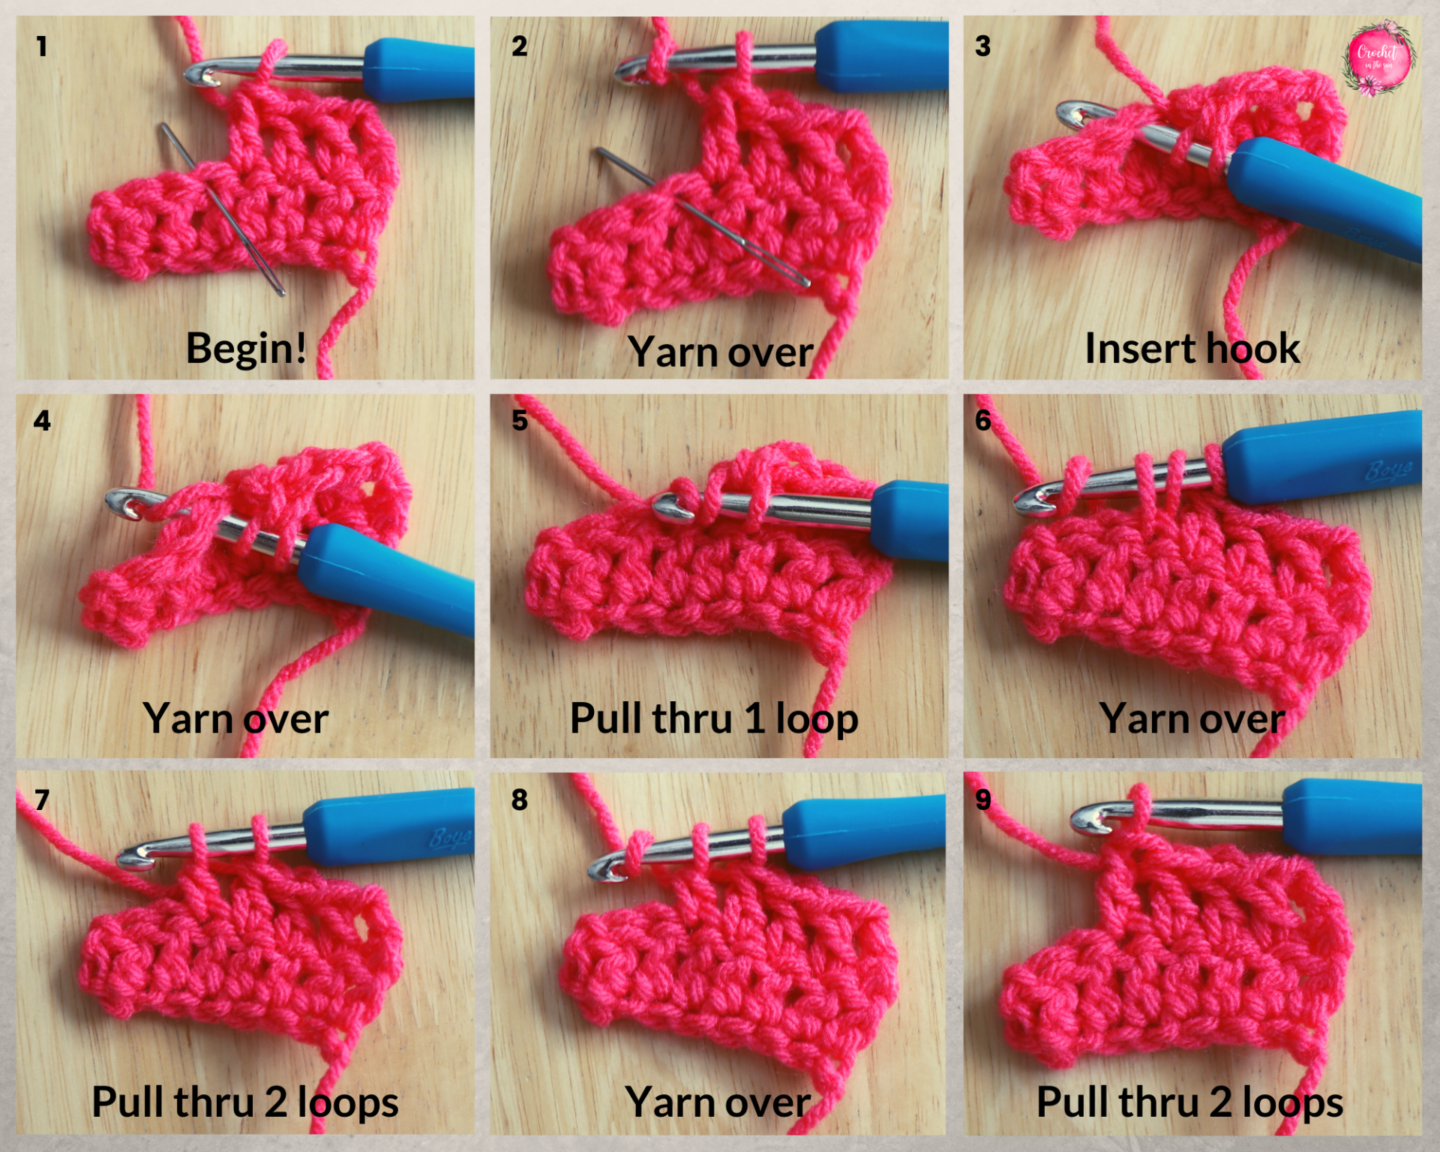 How to Crochet: Step by Step Start for Beginners